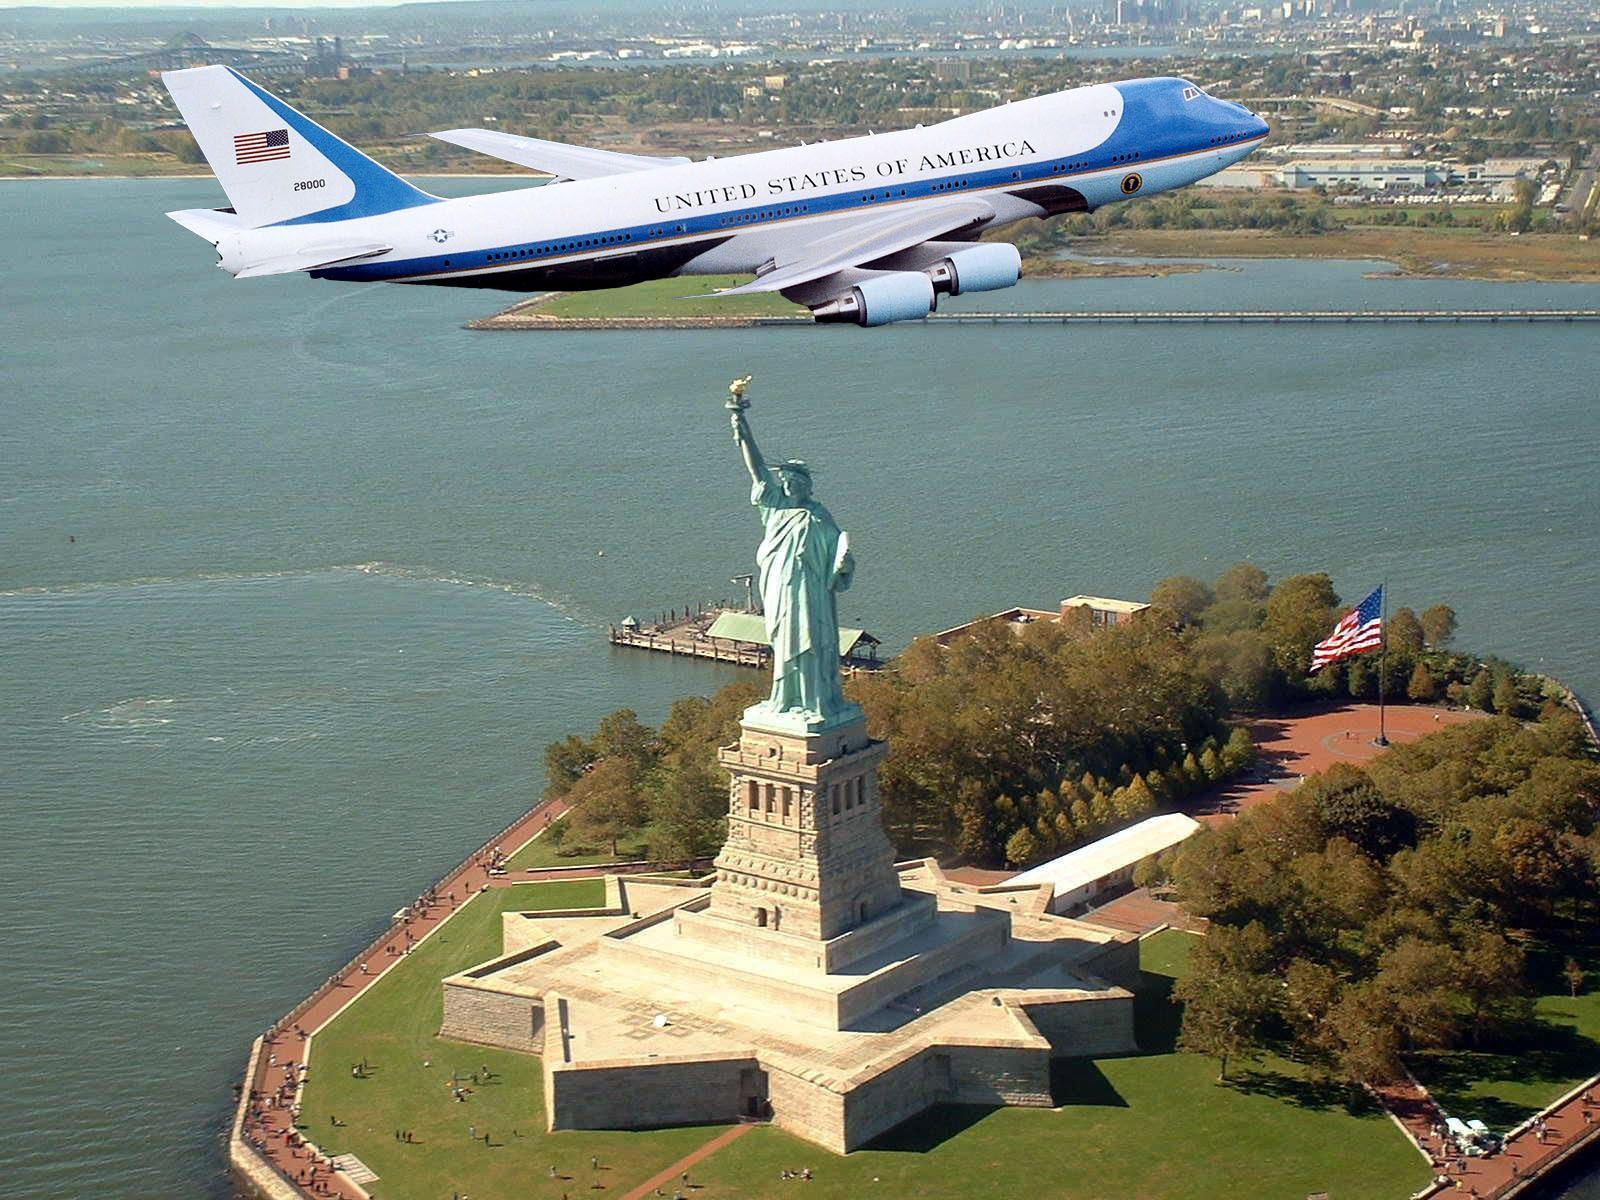 Air Force One over Lady Liberty, Air .com